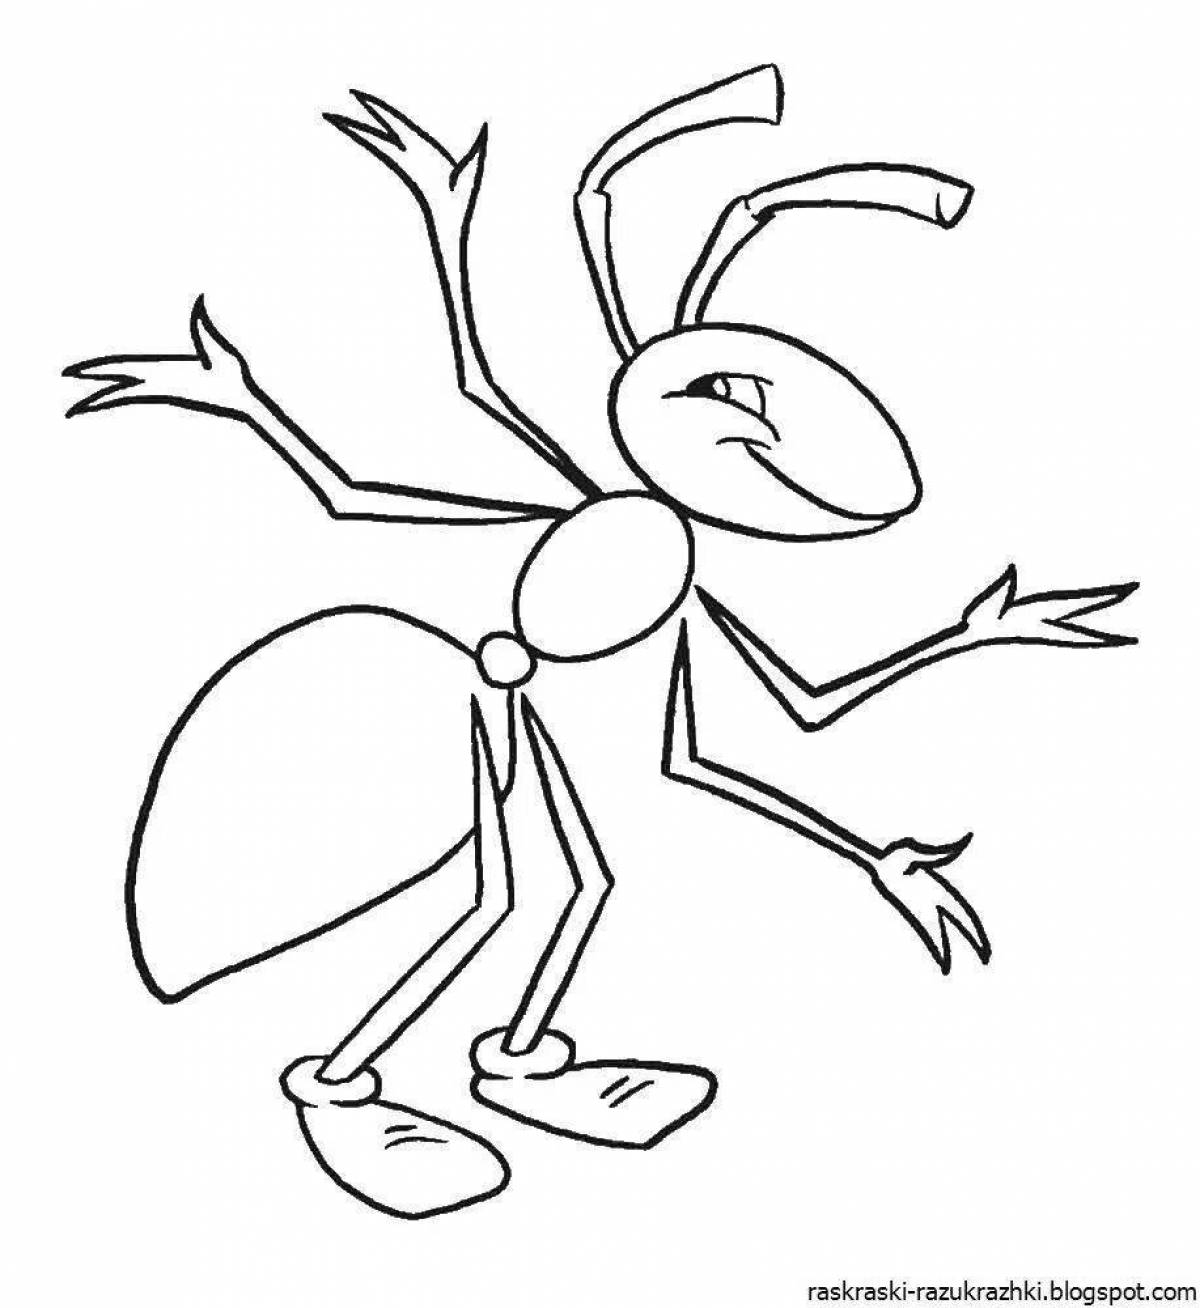 Cute ant coloring book for kids